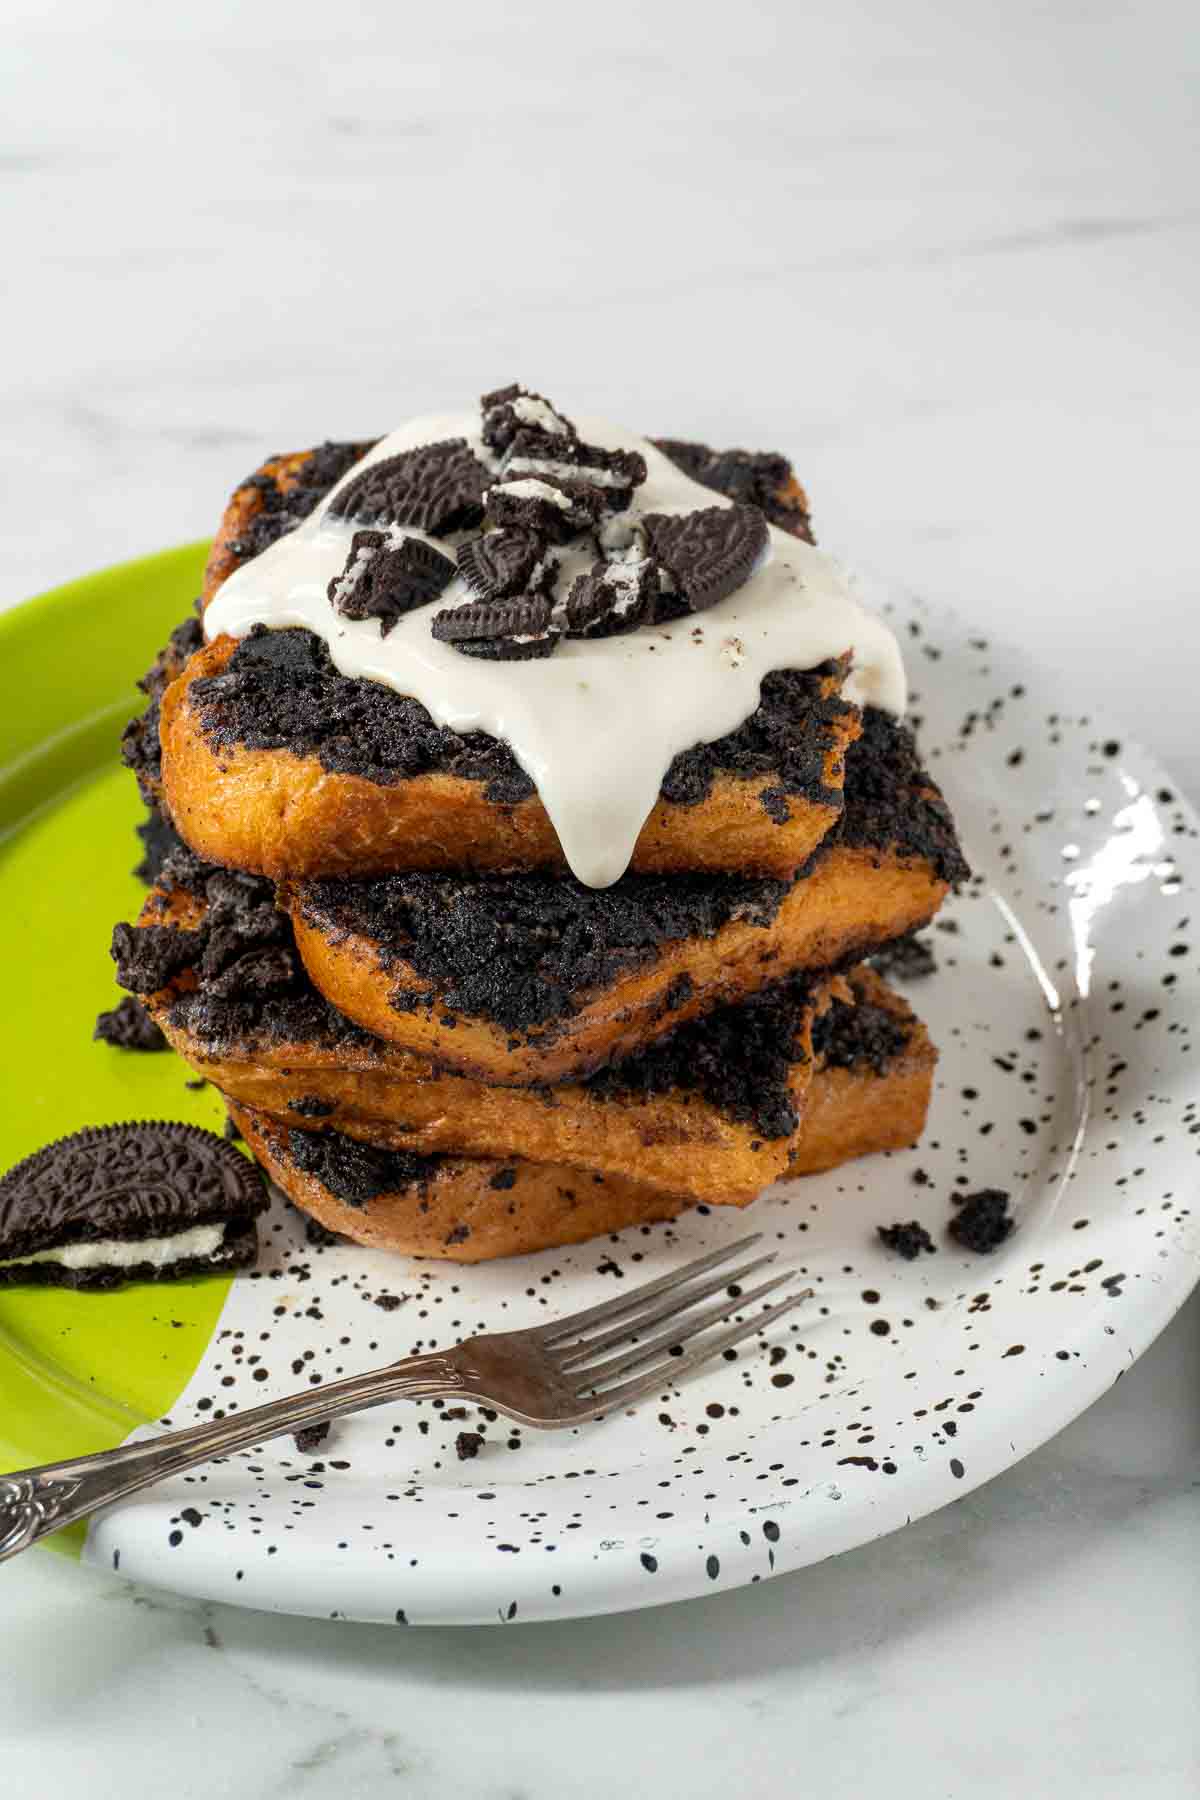 A stack of Oreo French Toast on a plate. A fork is next to the brunch meal, ready to start eating!